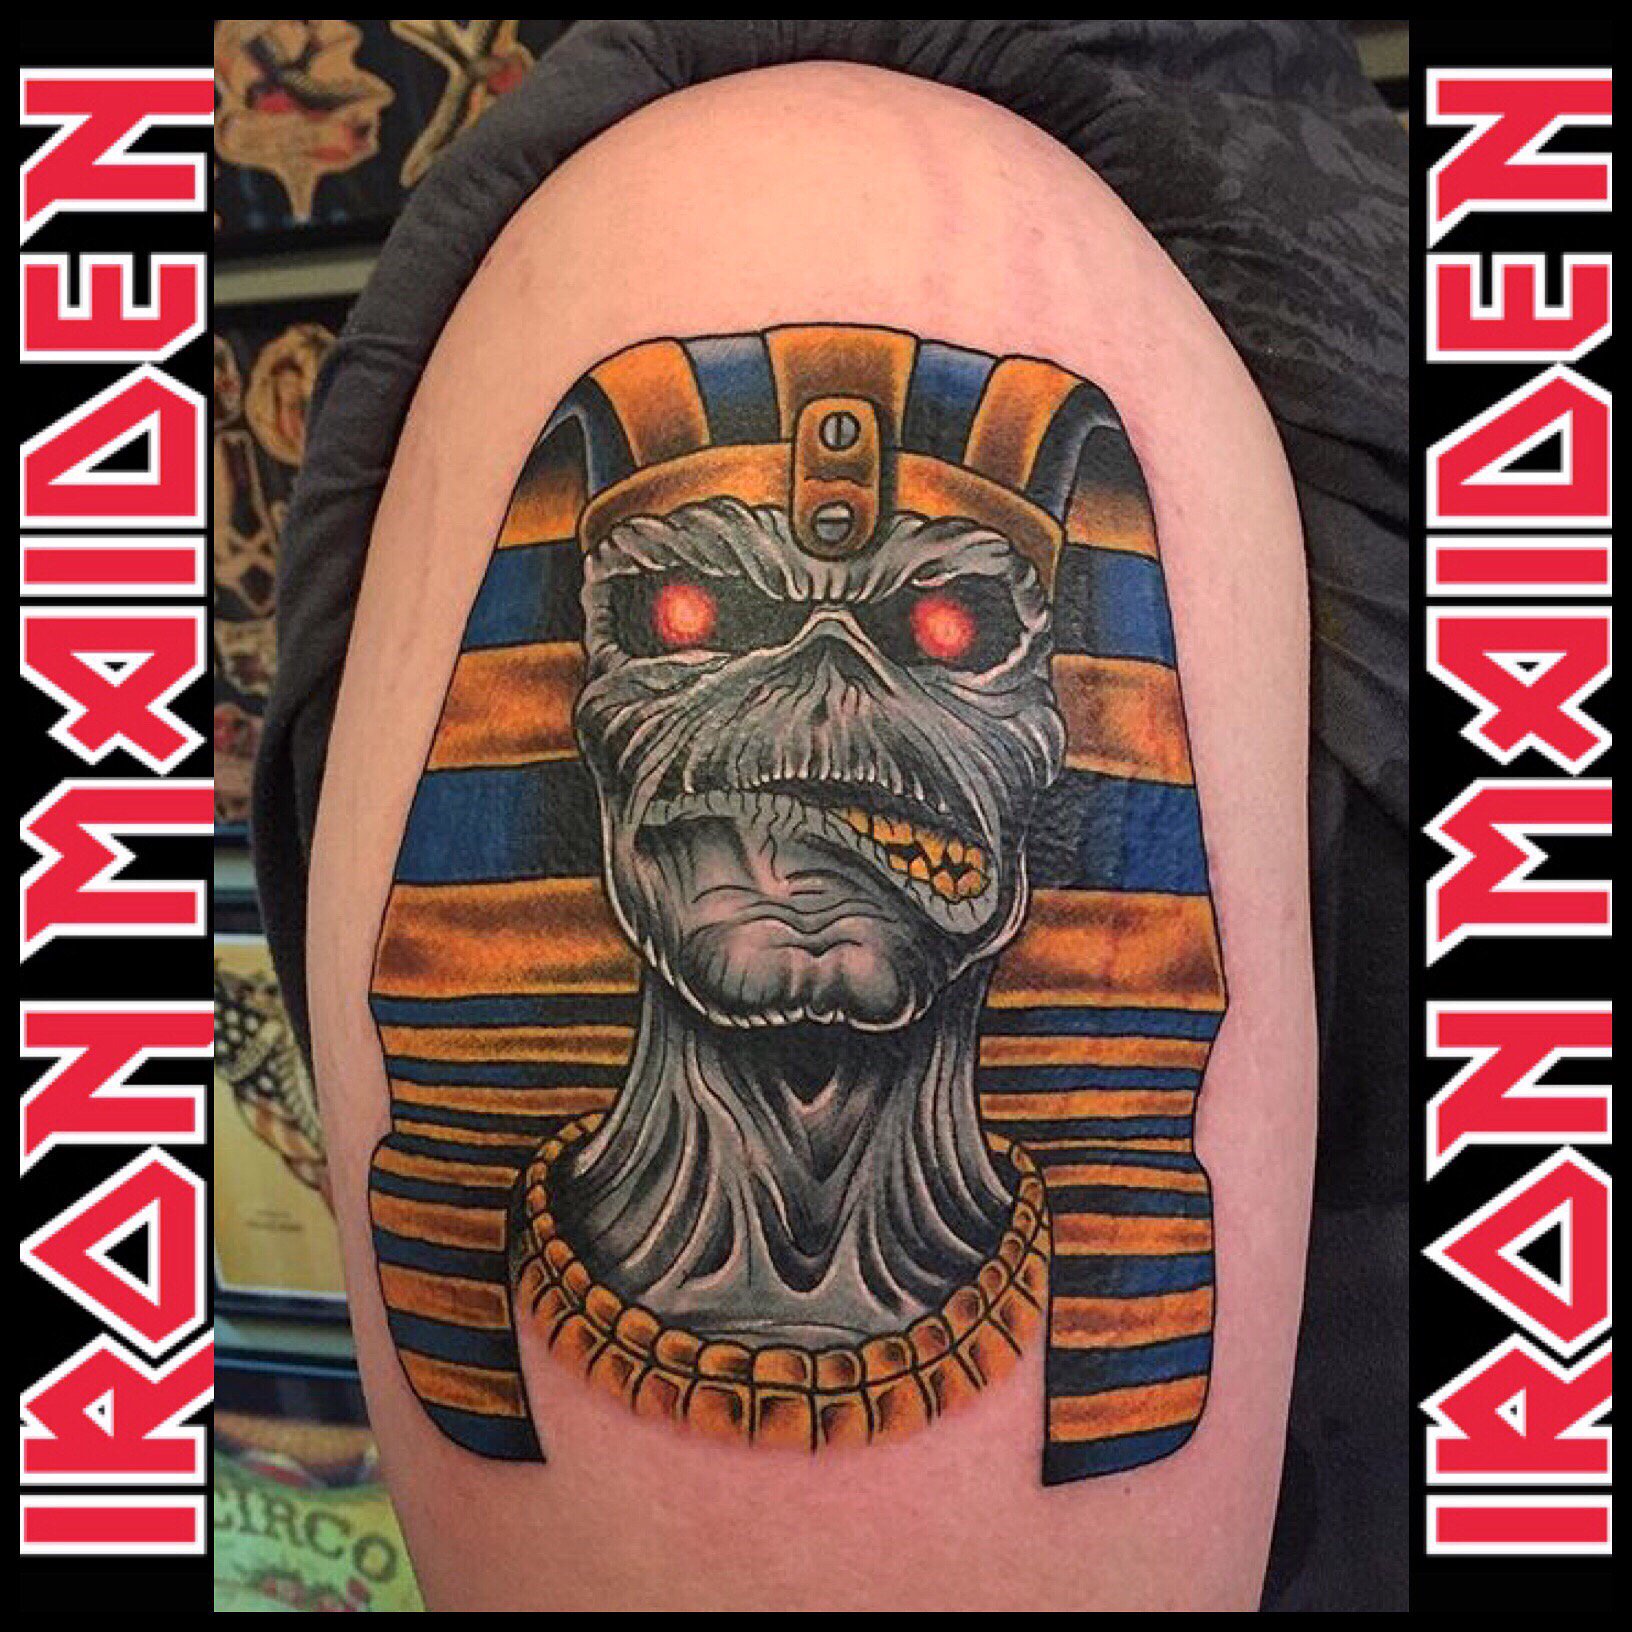 Here are some tattoos for fans of Iron Maiden